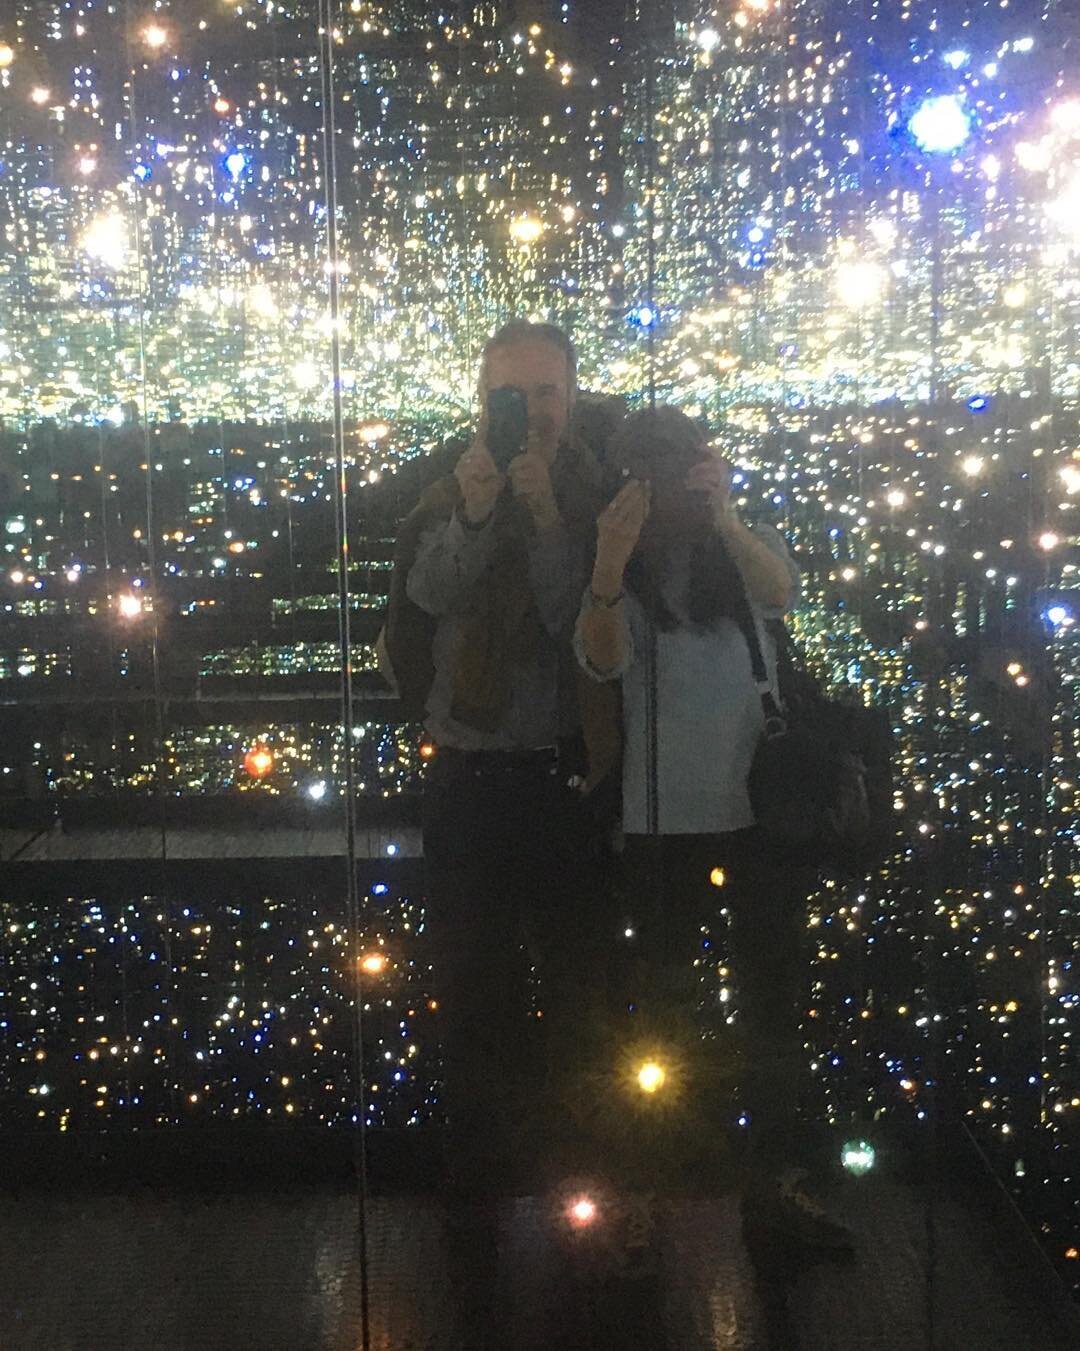 Me and my wife Wanda at the infinity mirror room at the Broad museum downtown